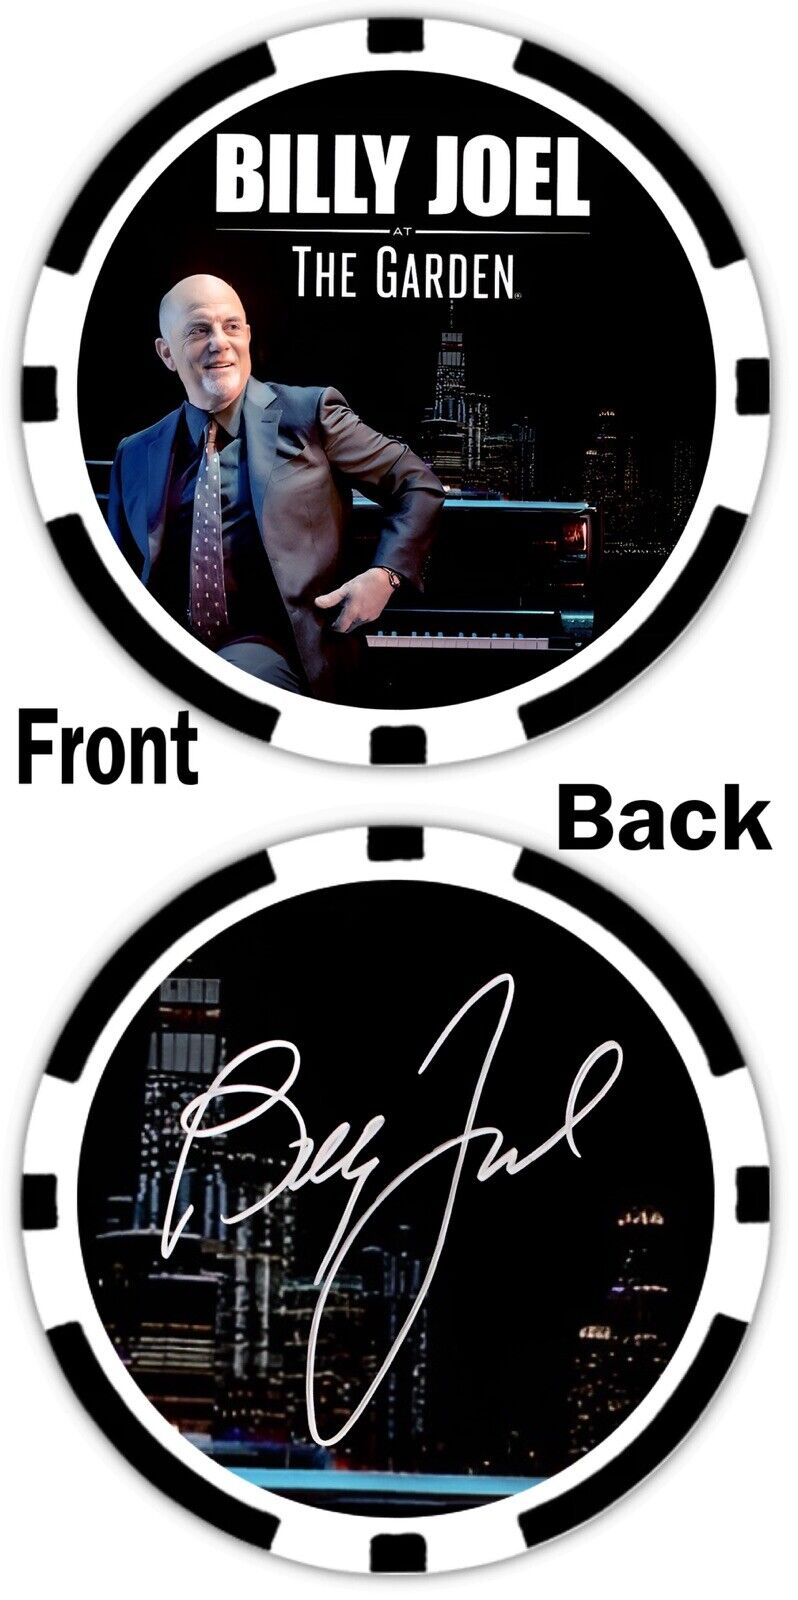 BILLY JOEL at THE GARDEN - COMMEMORATIVE POKER CHIP - **SIGNED**